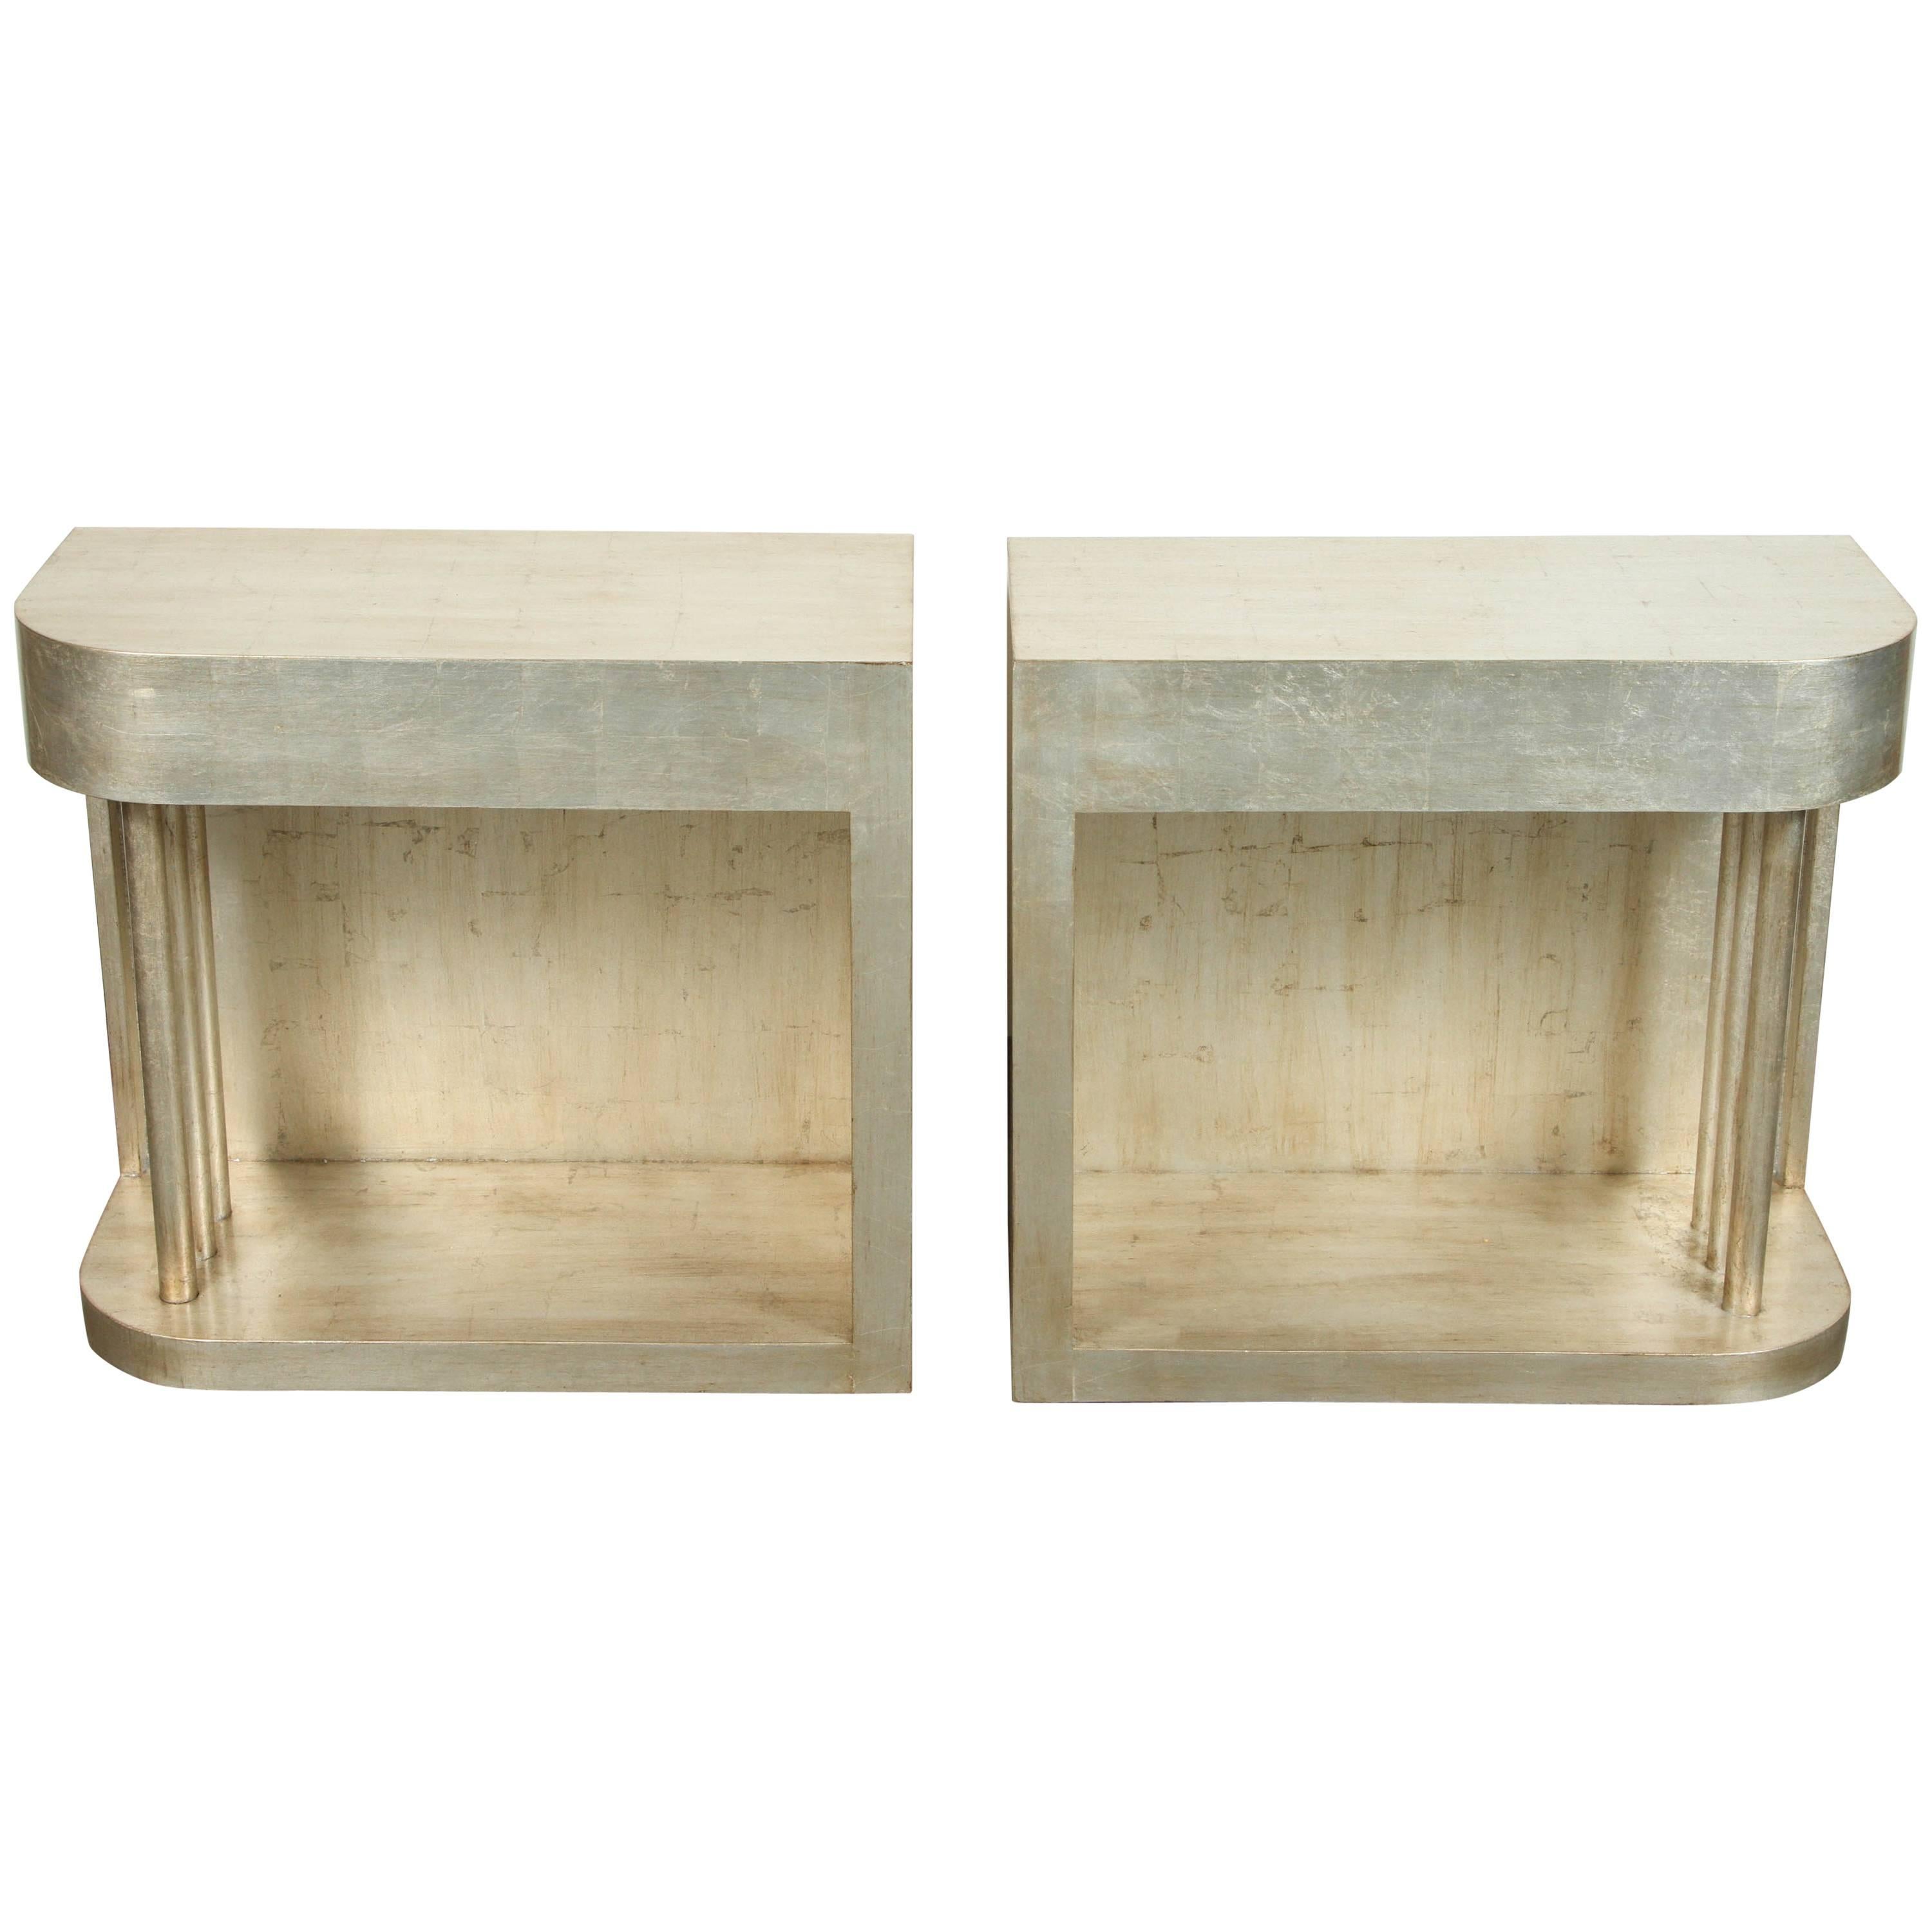 Pair of Deco Style End Tables by James Mont